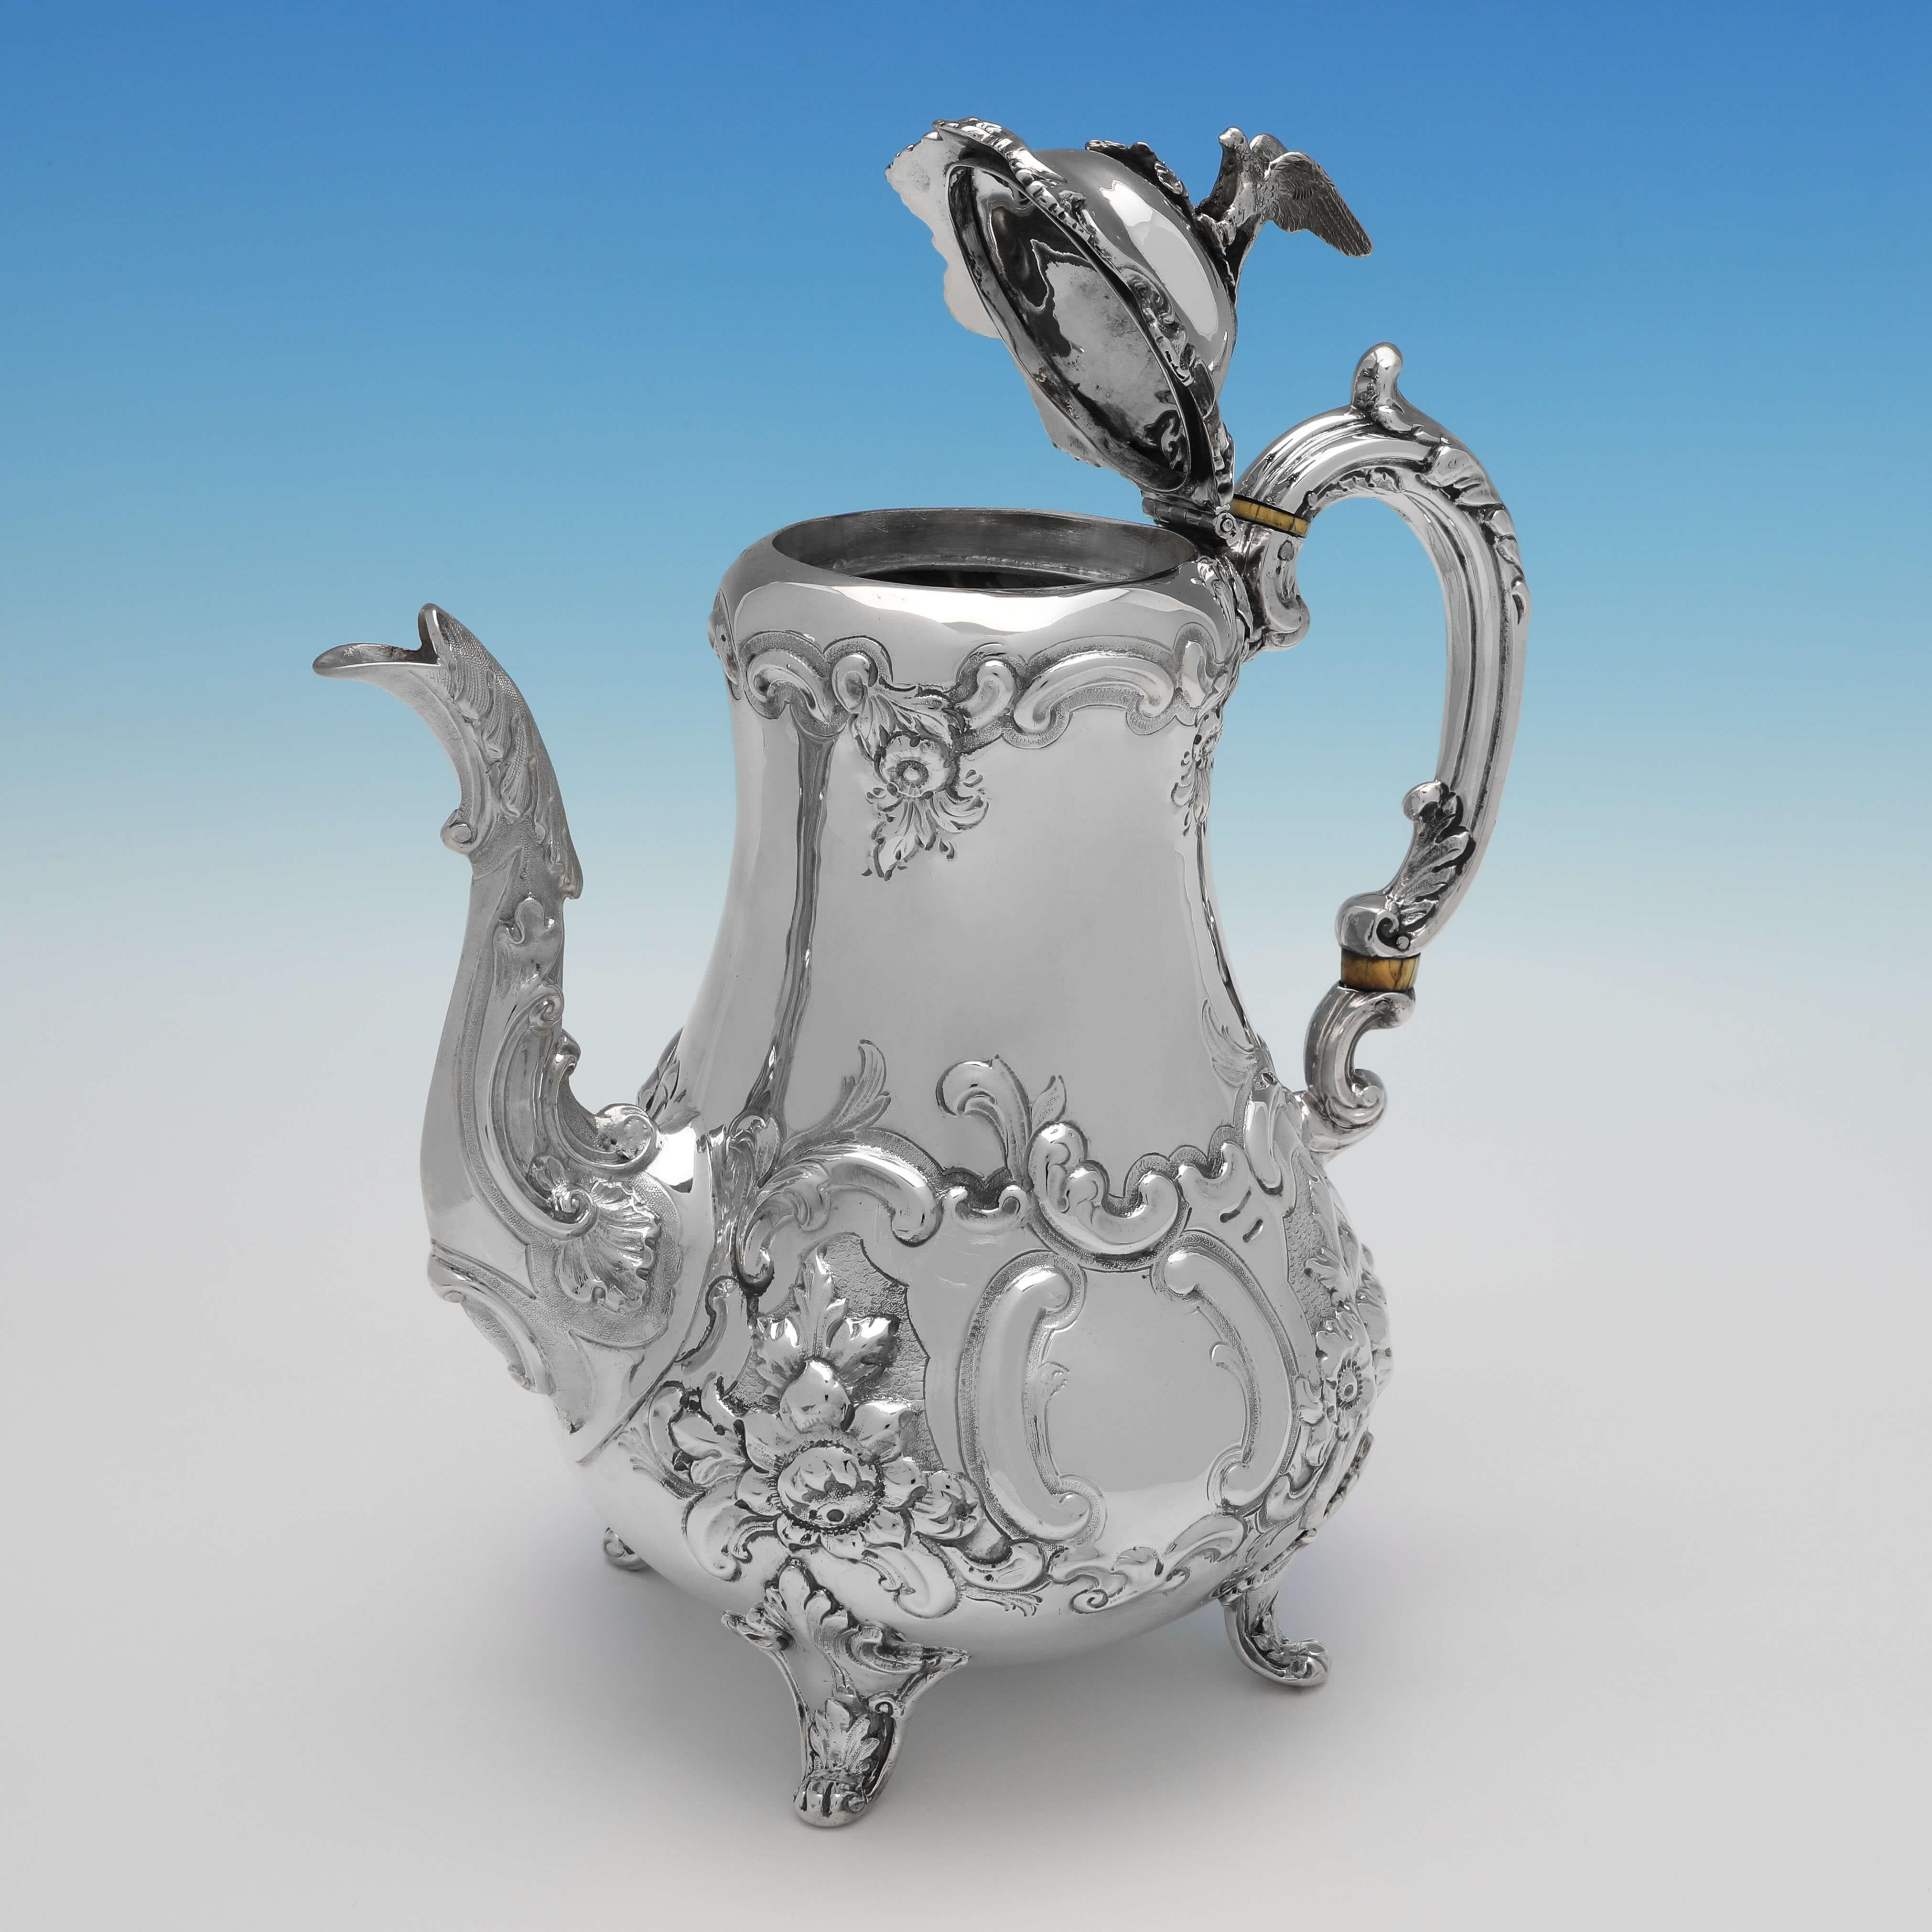 Hallmarked in London in 1850 by William Hunter, this attractive, Victorian, Antique Sterling Silver Coffee Pot, is in the sought after 'Louis Pattern', and features an engraved crest to one side. The coffee pot measures 10.5